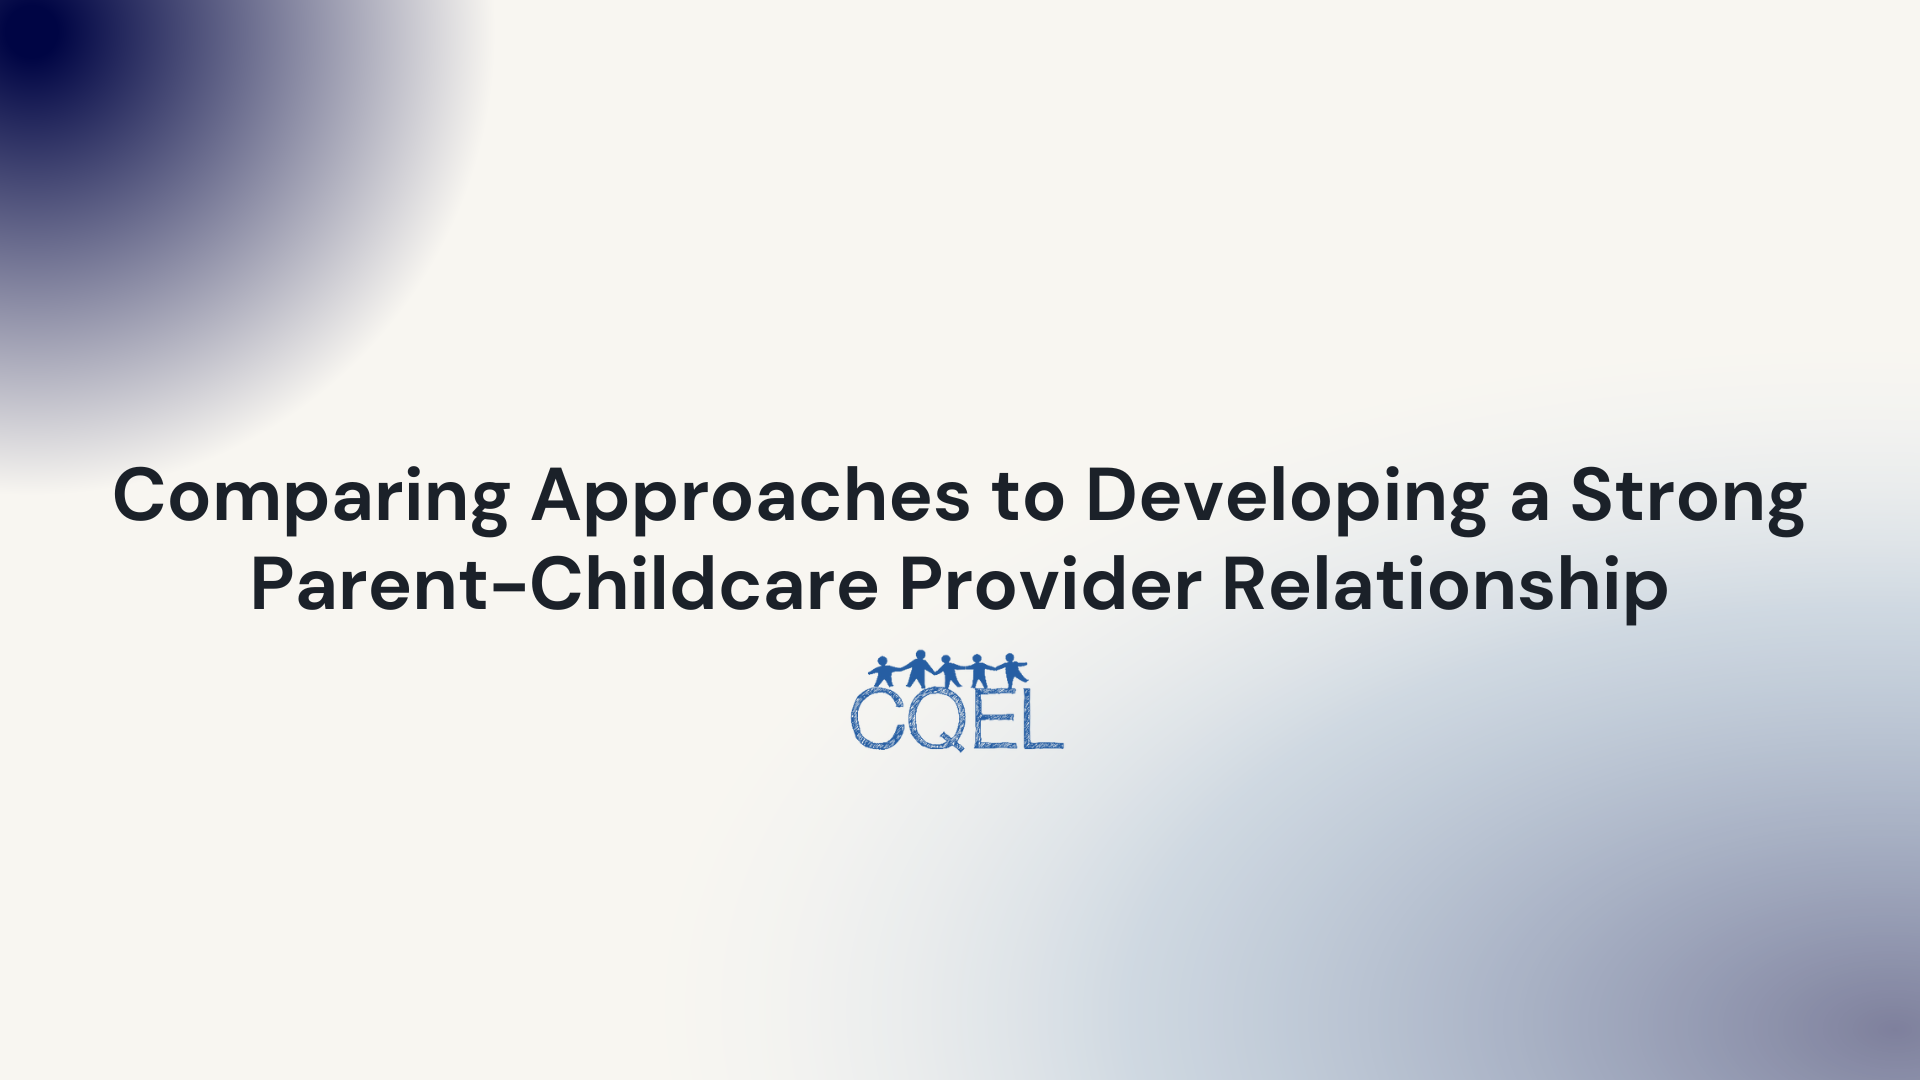 Comparing Approaches to Developing a Strong Parent-Childcare Provider Relationship in California